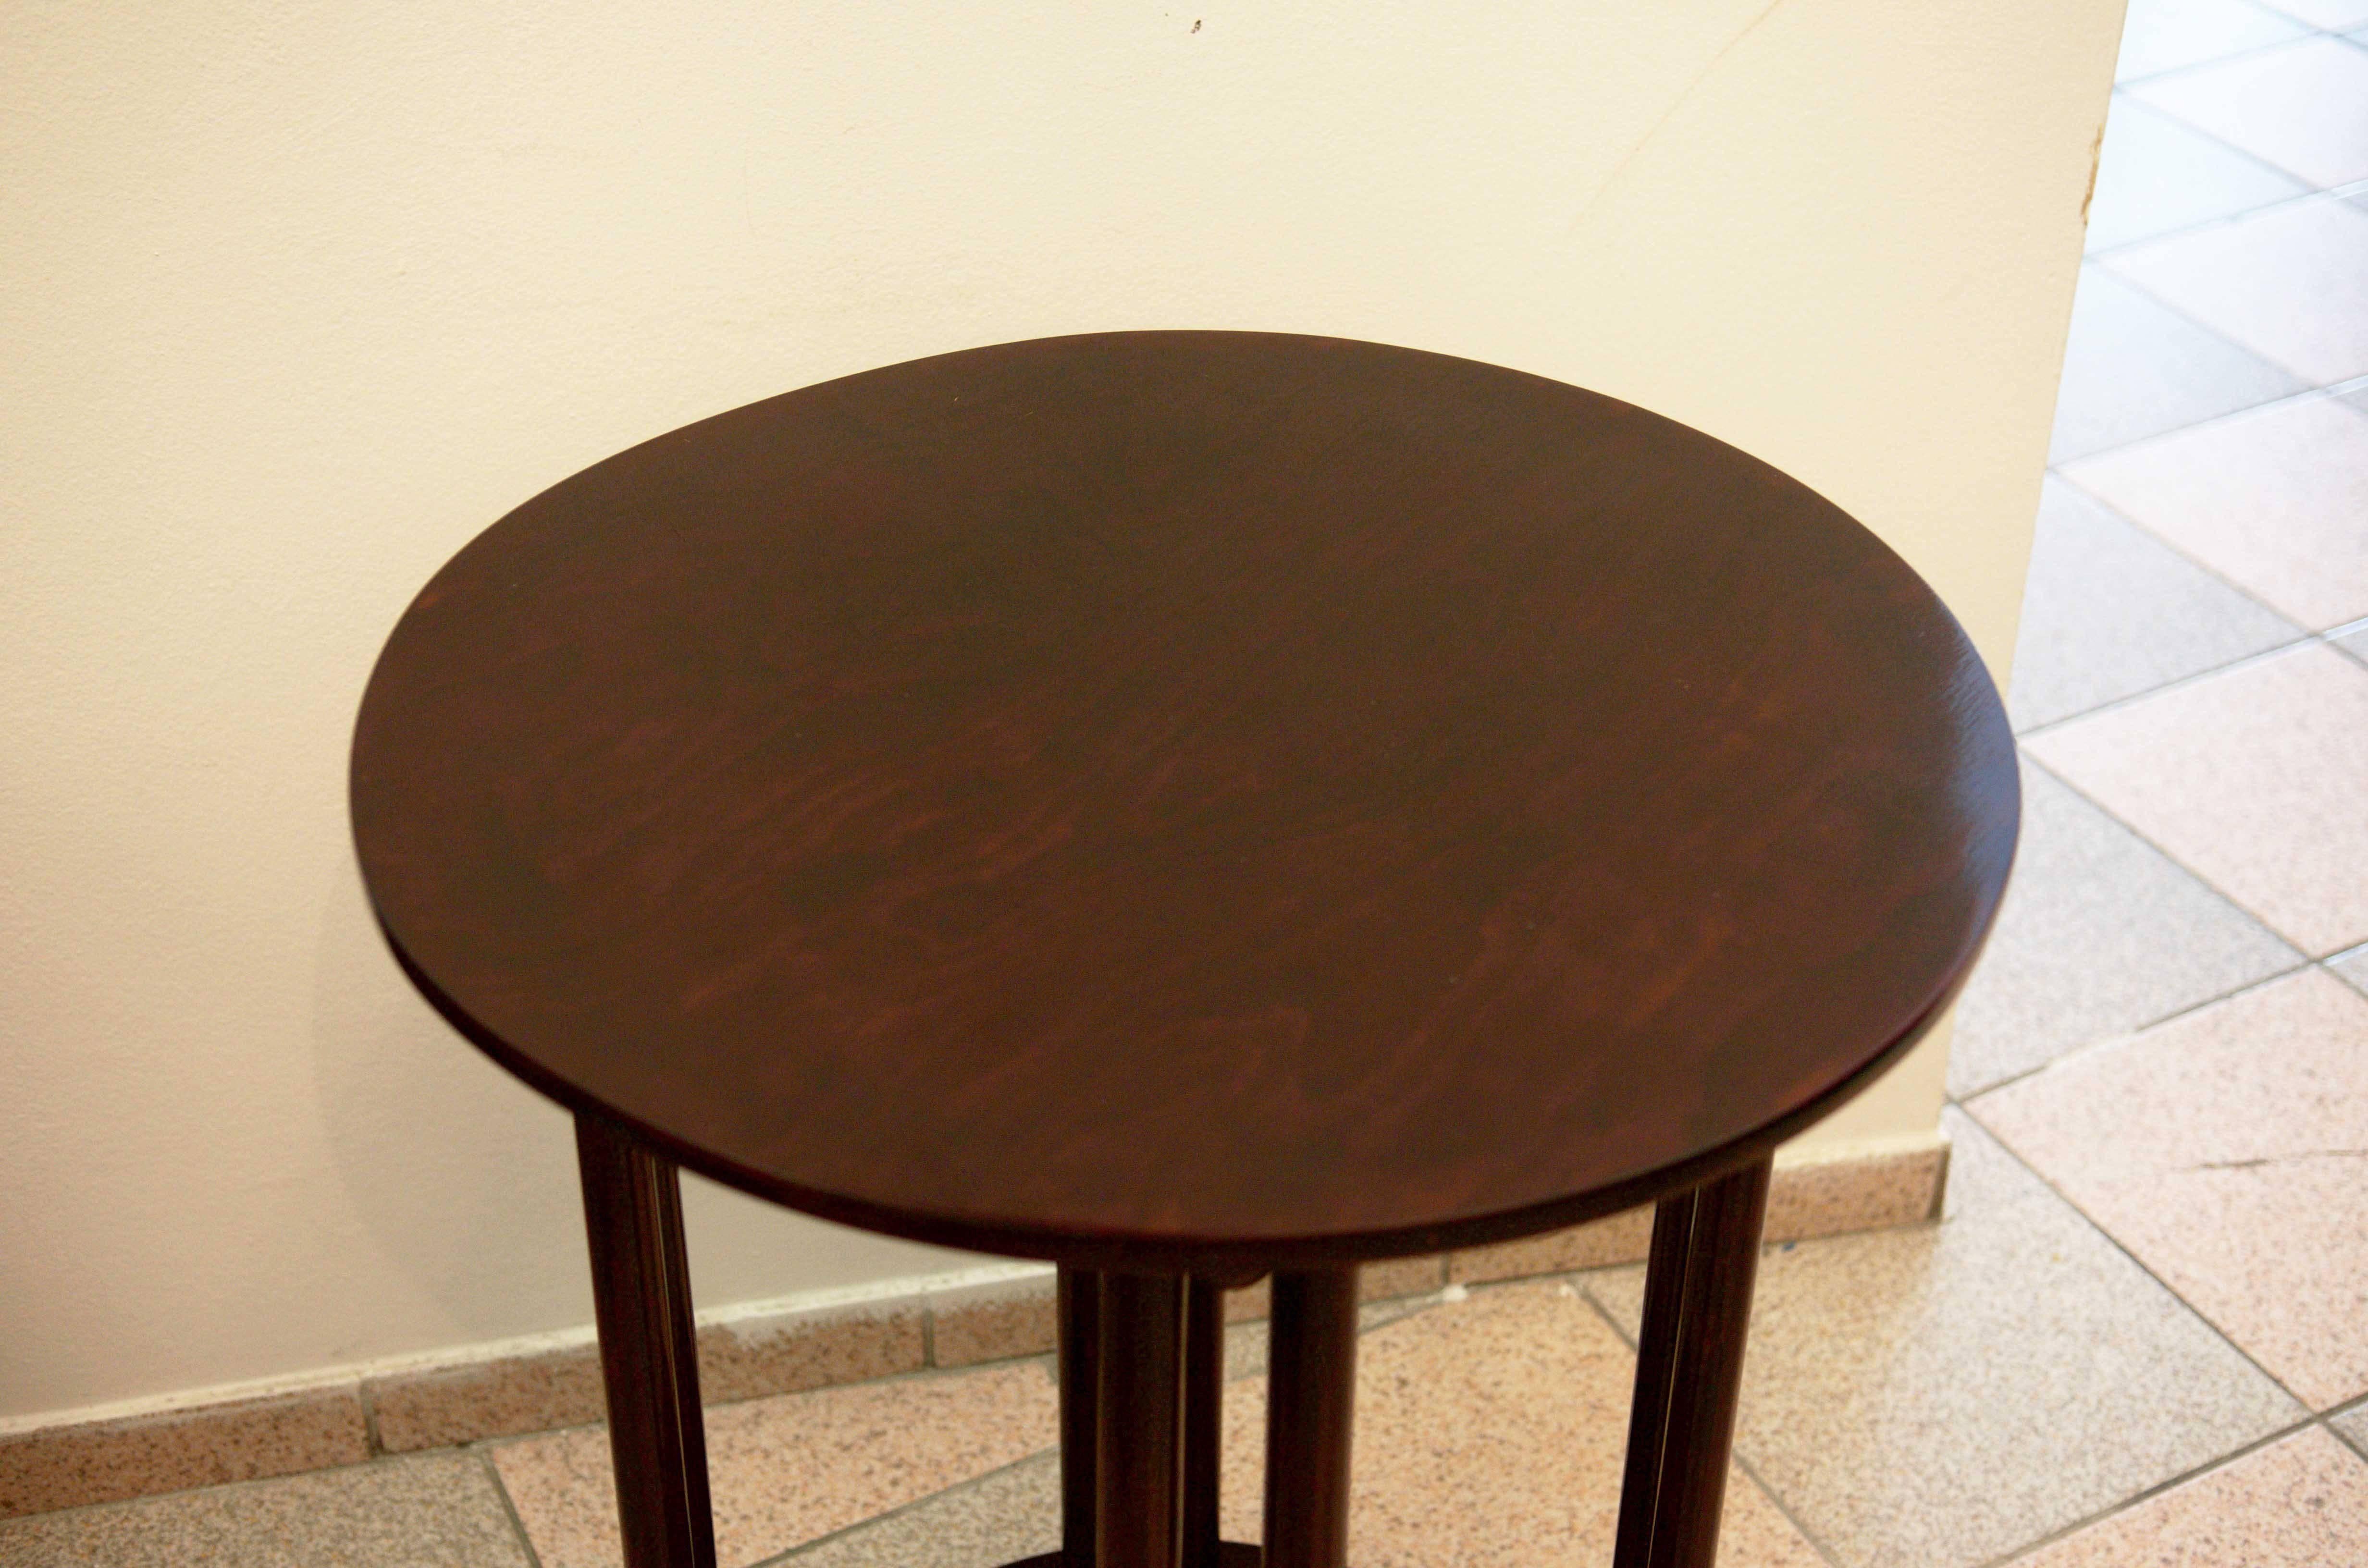 Austrian Vienna Secession Round Thonet Coffee or Cocktail Table